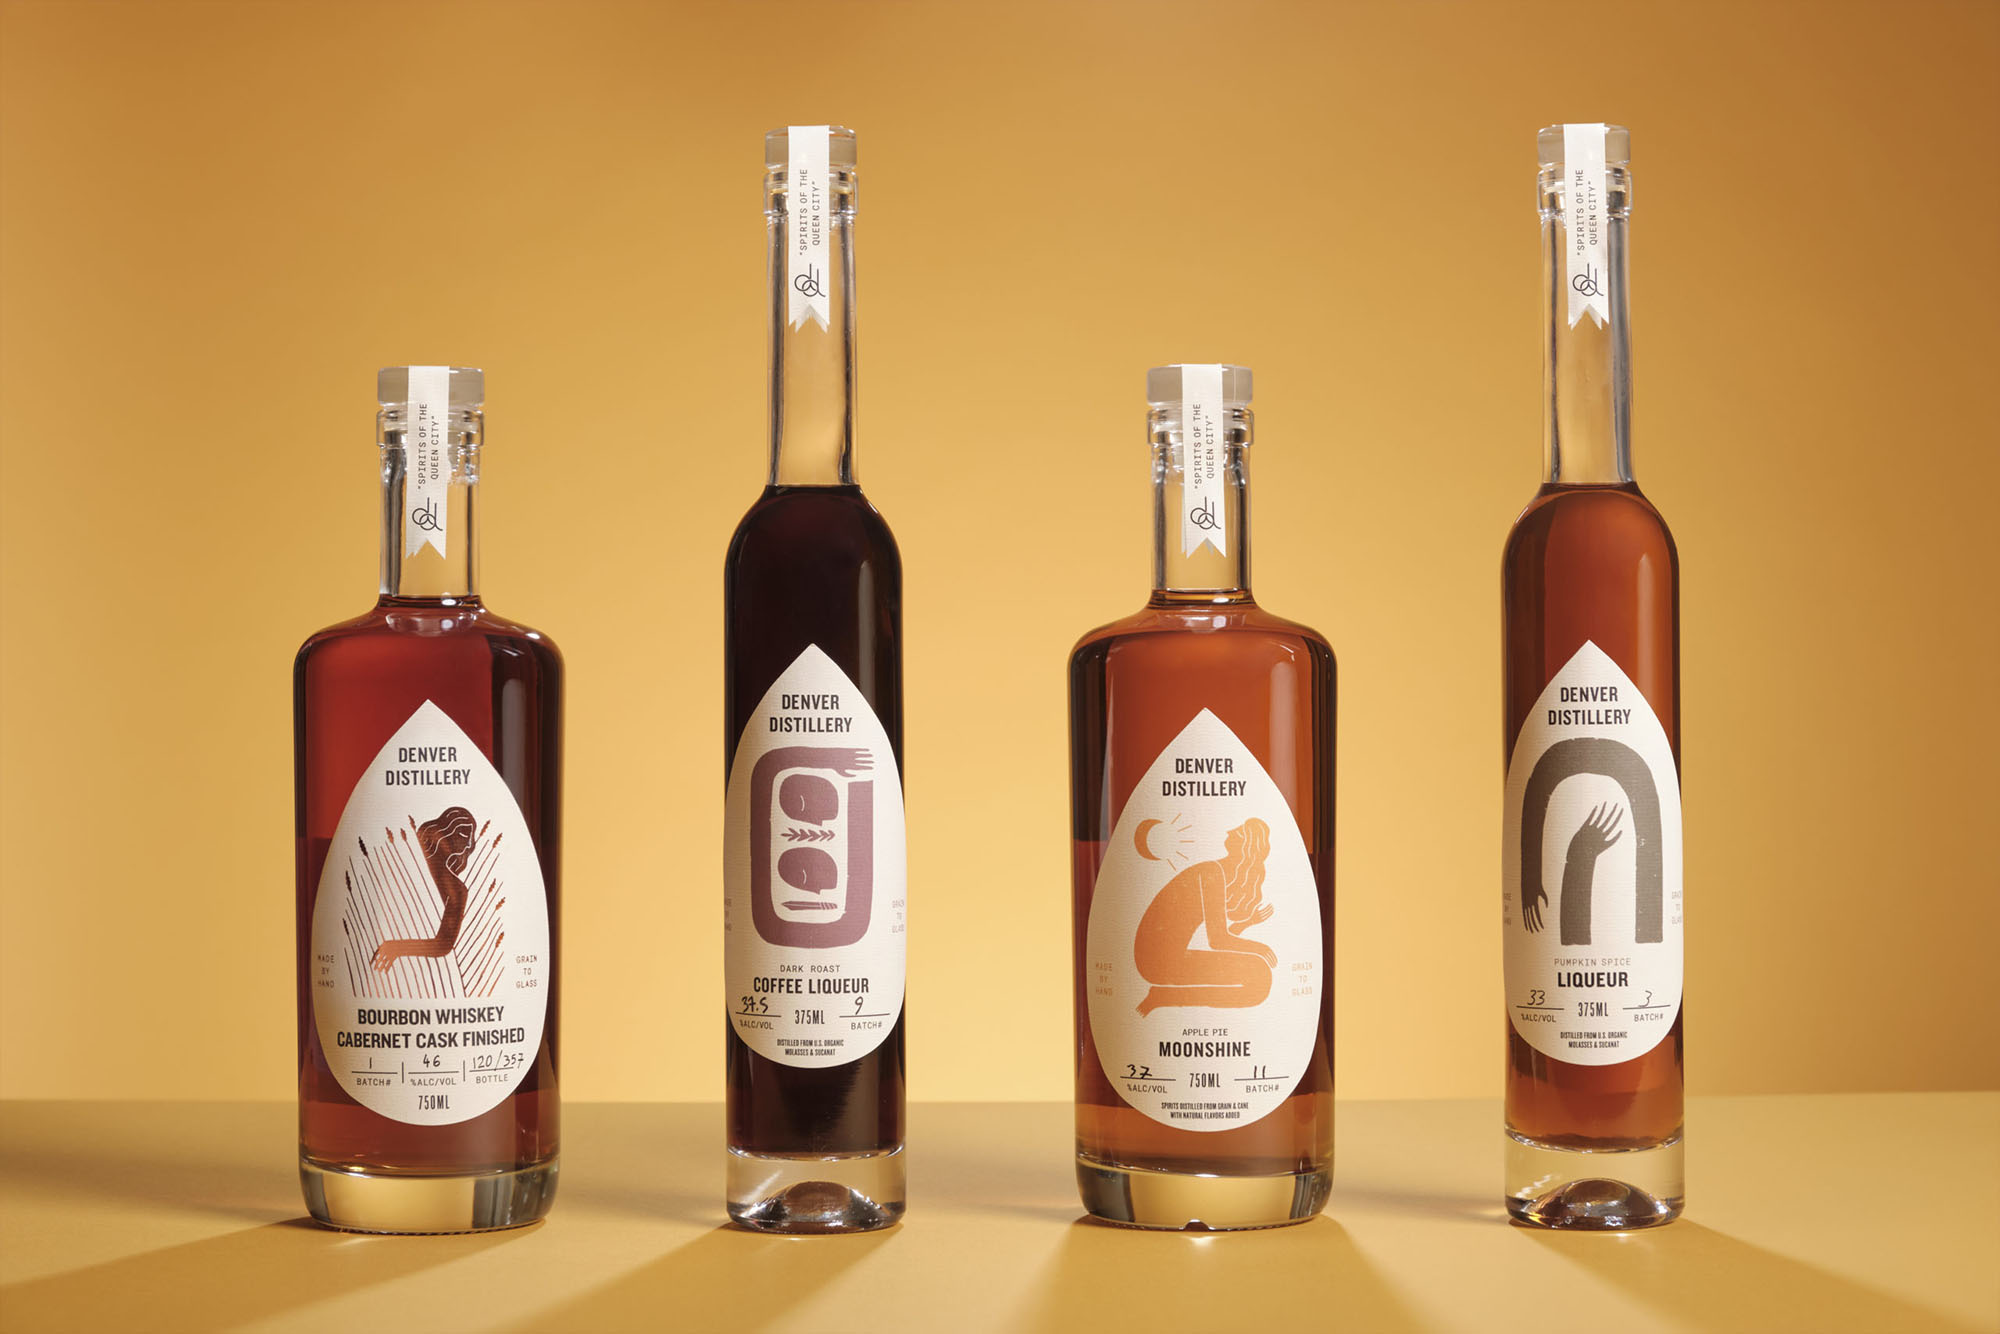 New Logo and Packaging for Denver Distillery by O Street